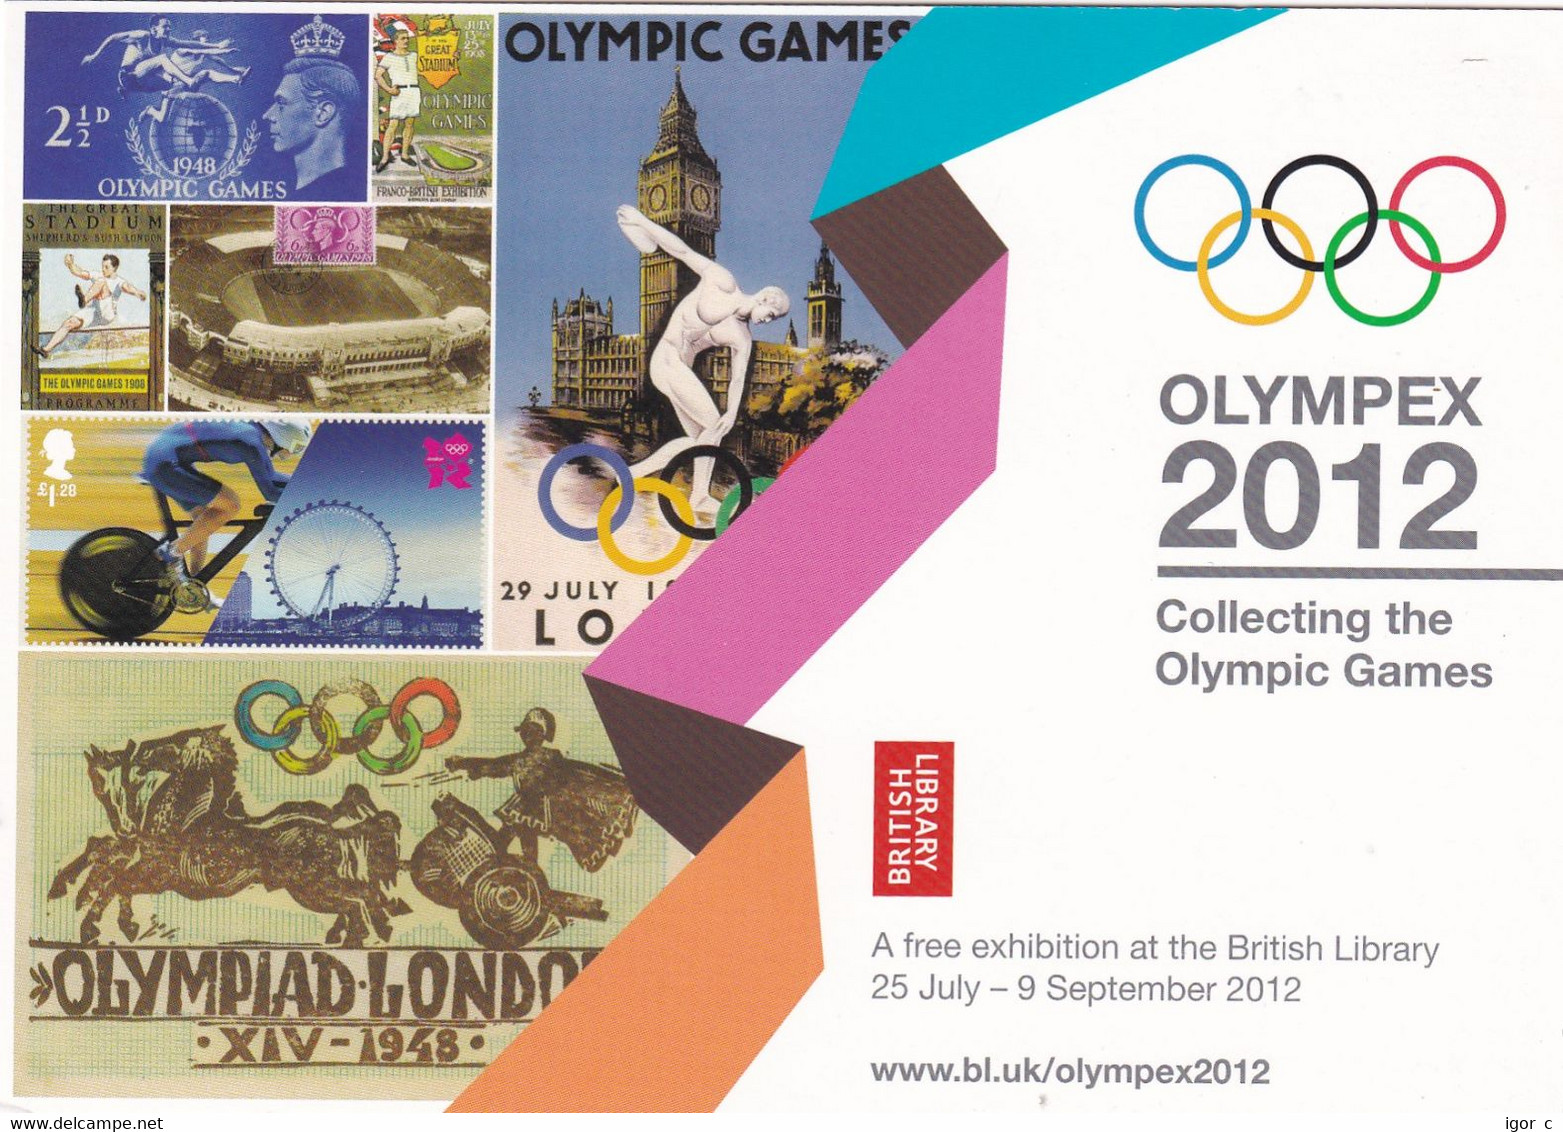 United Kingdom UK 2012 Card: Olympic Games London; Olympex 2012 STADION E20 CANCELLATION; Diving; Chatiot Race Cycling - Estate 2028 : Los Angeles